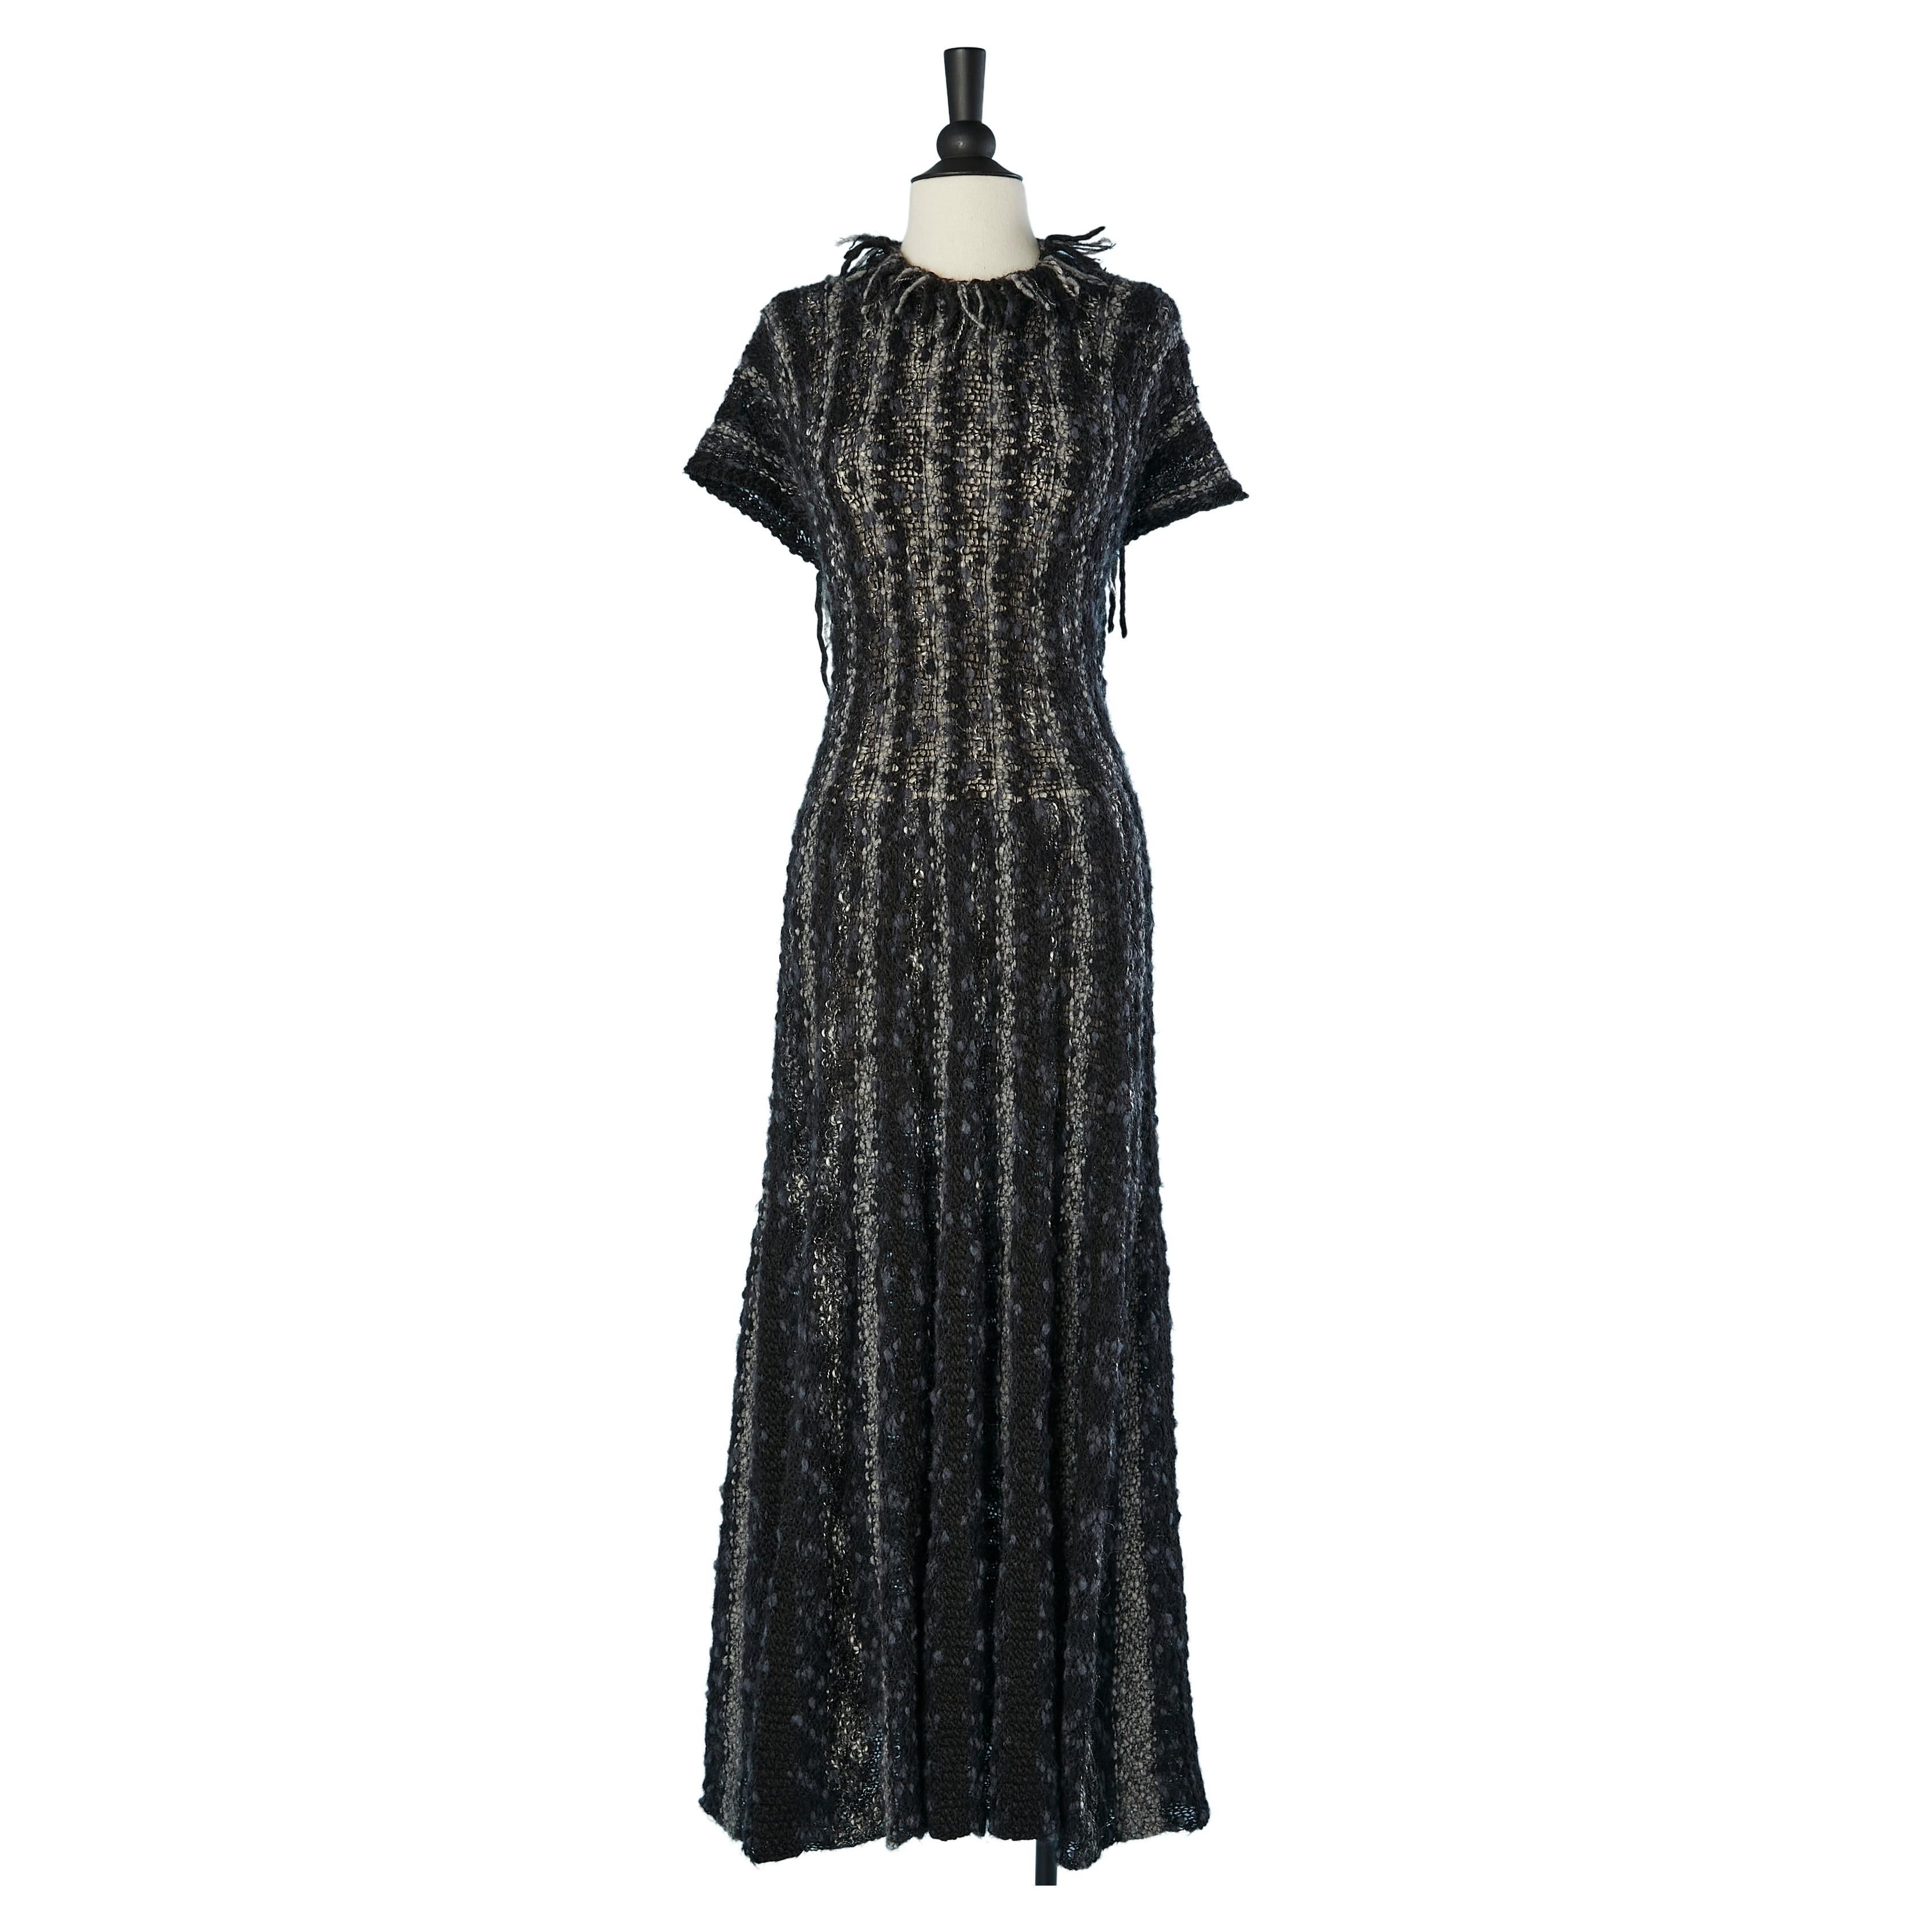 Black and grey chiné knit evening dress with rhinestone back strap Chanel 